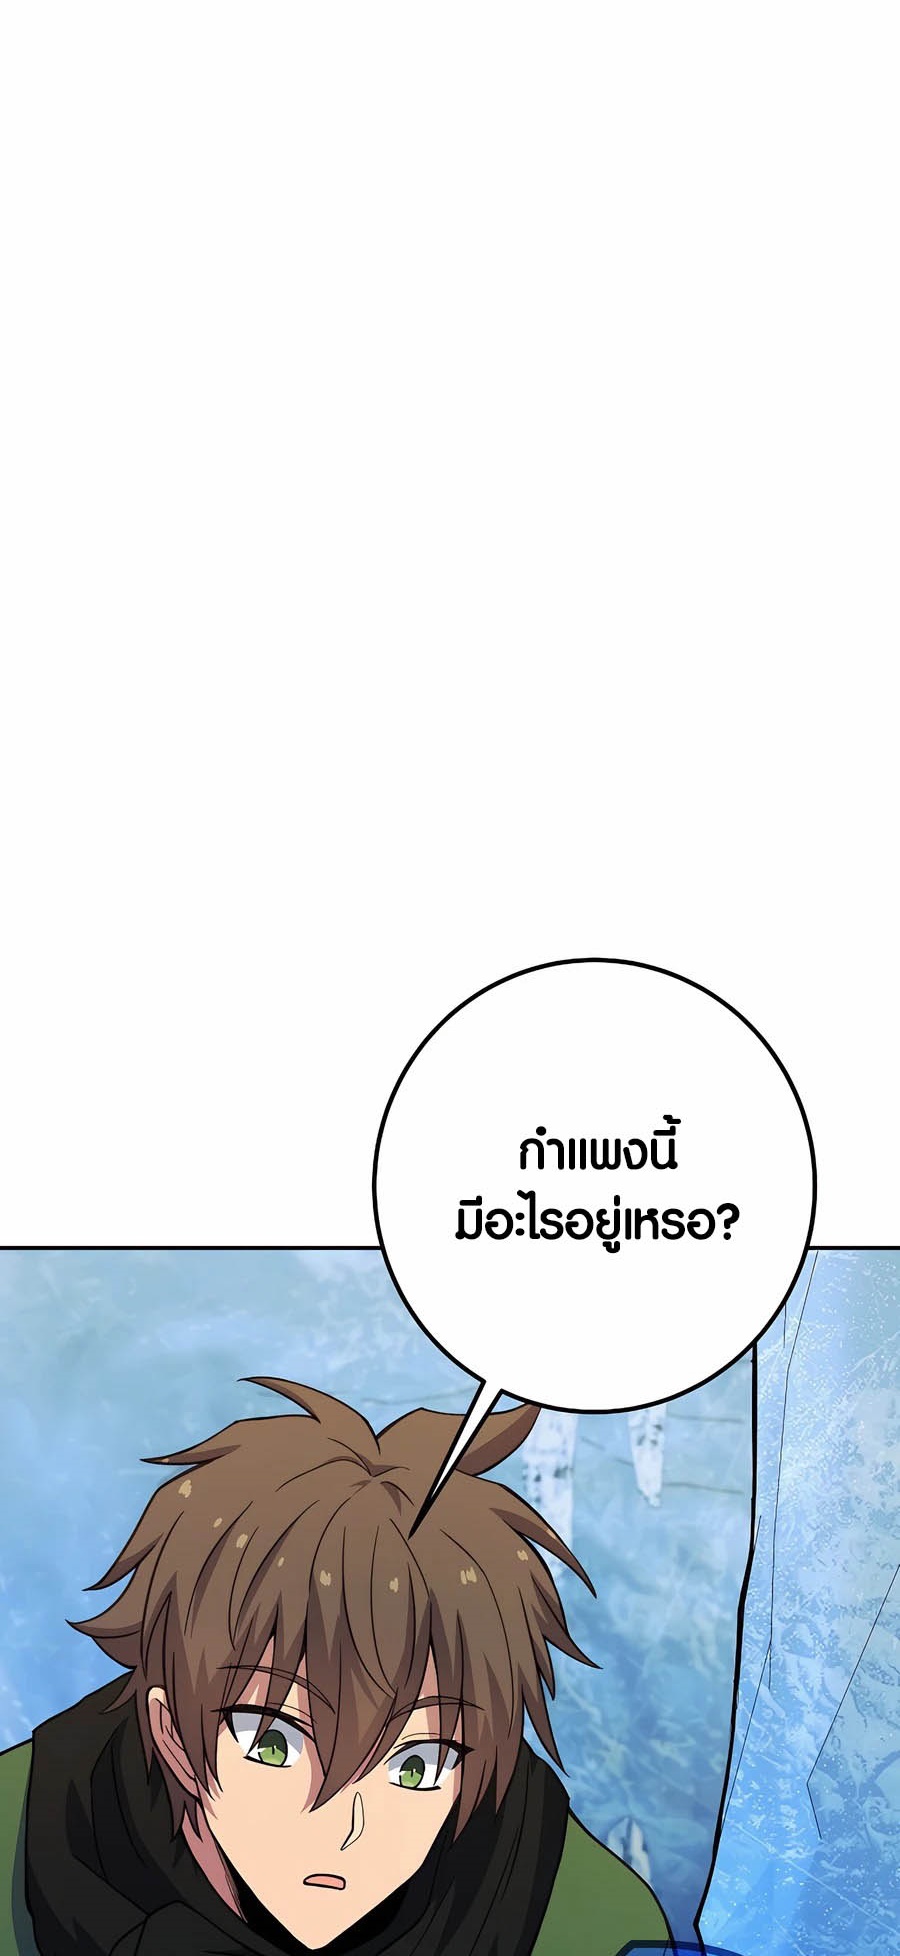 à¸­à¹ˆà¸²à¸™à¸¡à¸±à¸™à¸®à¸§à¸² à¹€à¸£à¸·à¹ˆà¸­à¸‡ The Part Time Land of the Gods 57 59